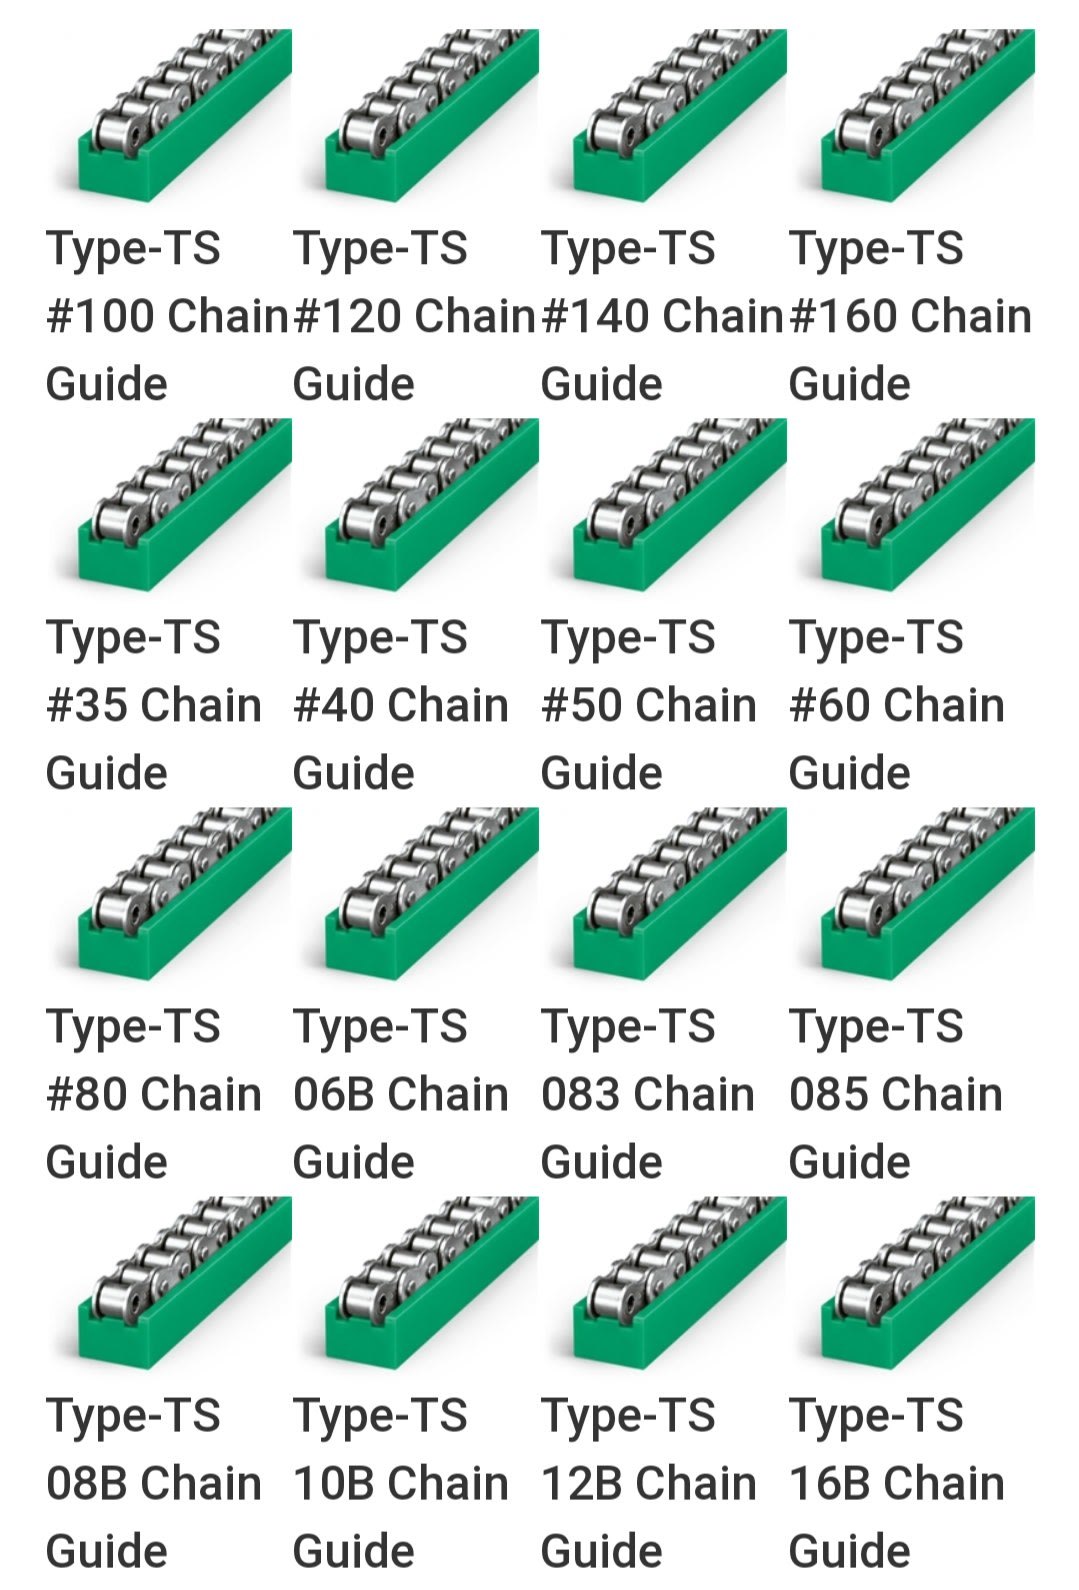 UHMWPE Roller chain guides